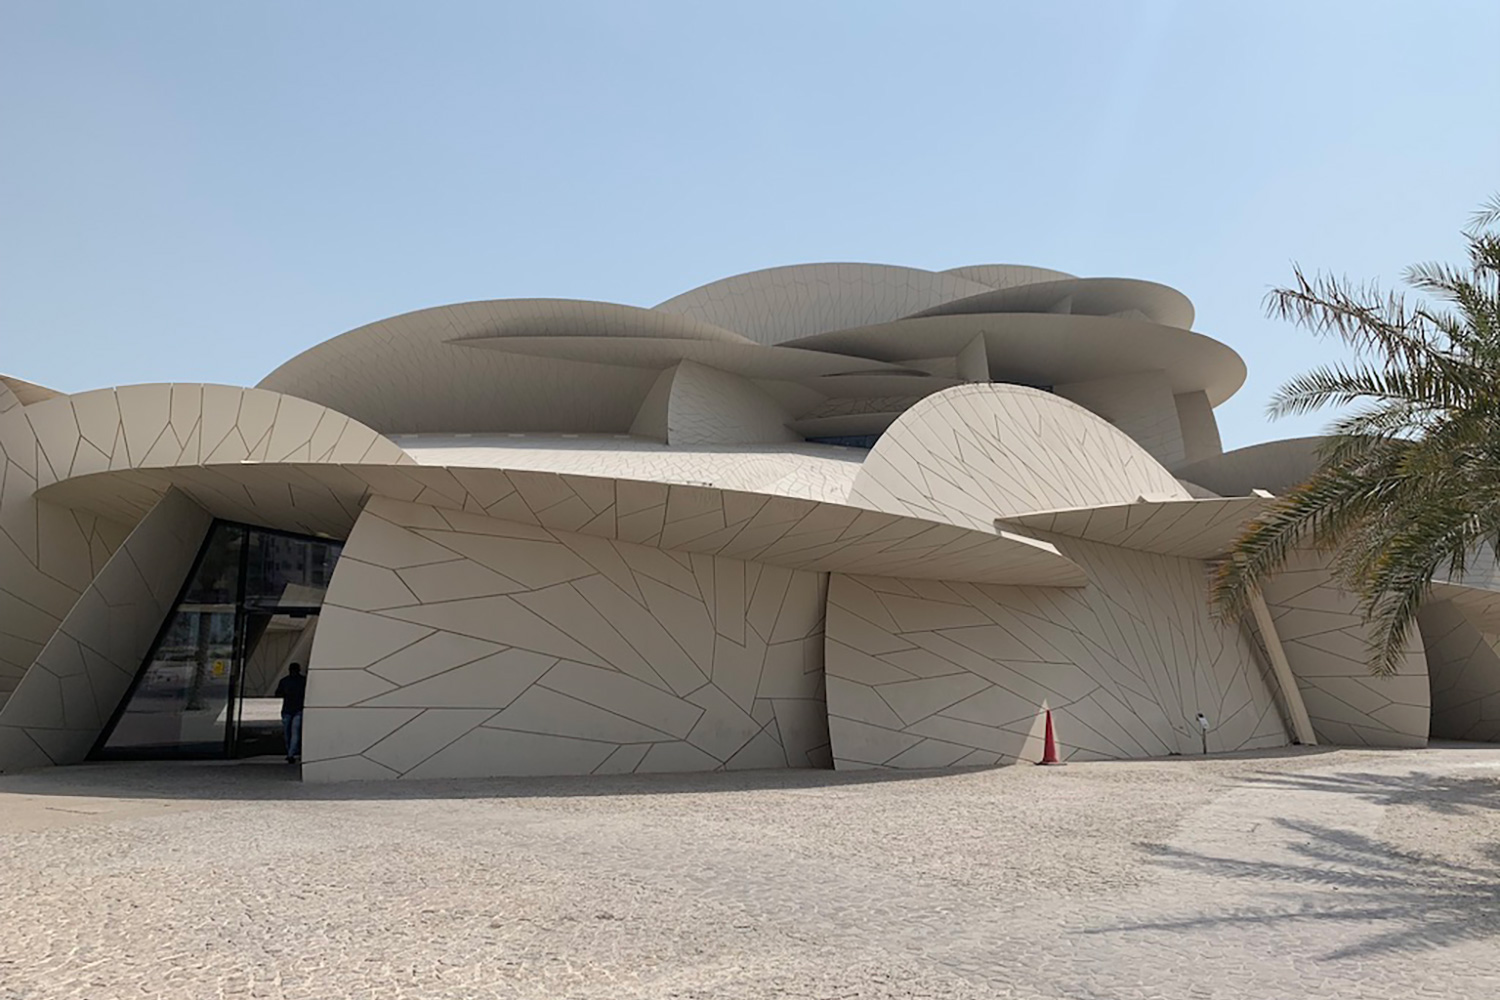 The National Museum of Qatar. WSDG was contracted to create a 3-D acoustic model of the space and make recommendations regarding appropriate speaker usage and placement. Façade 2.